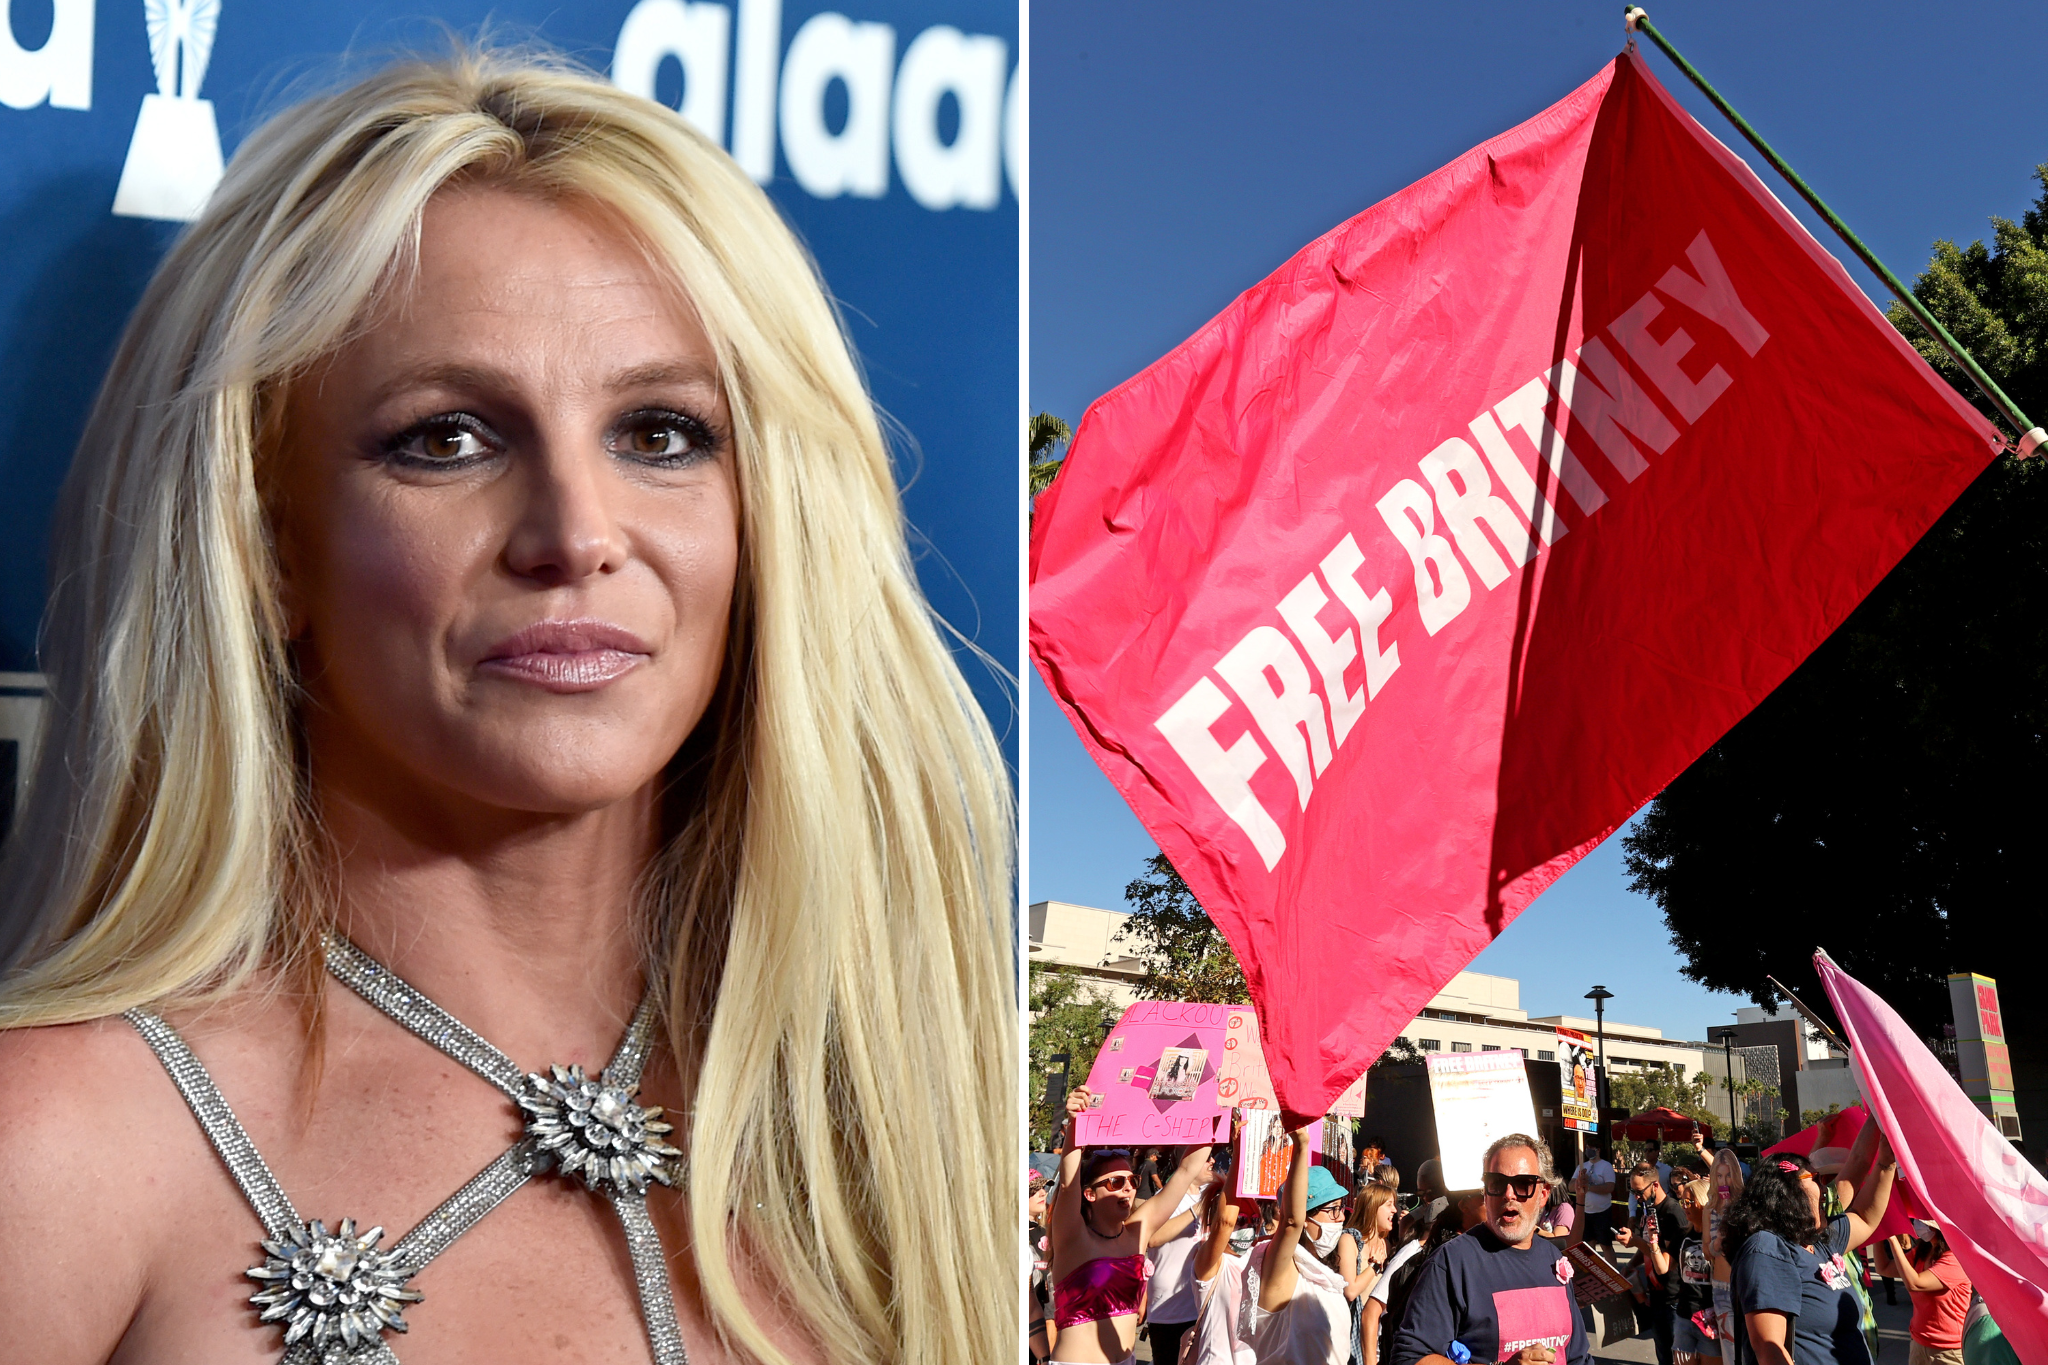 Britney Spears and #FreeBritney